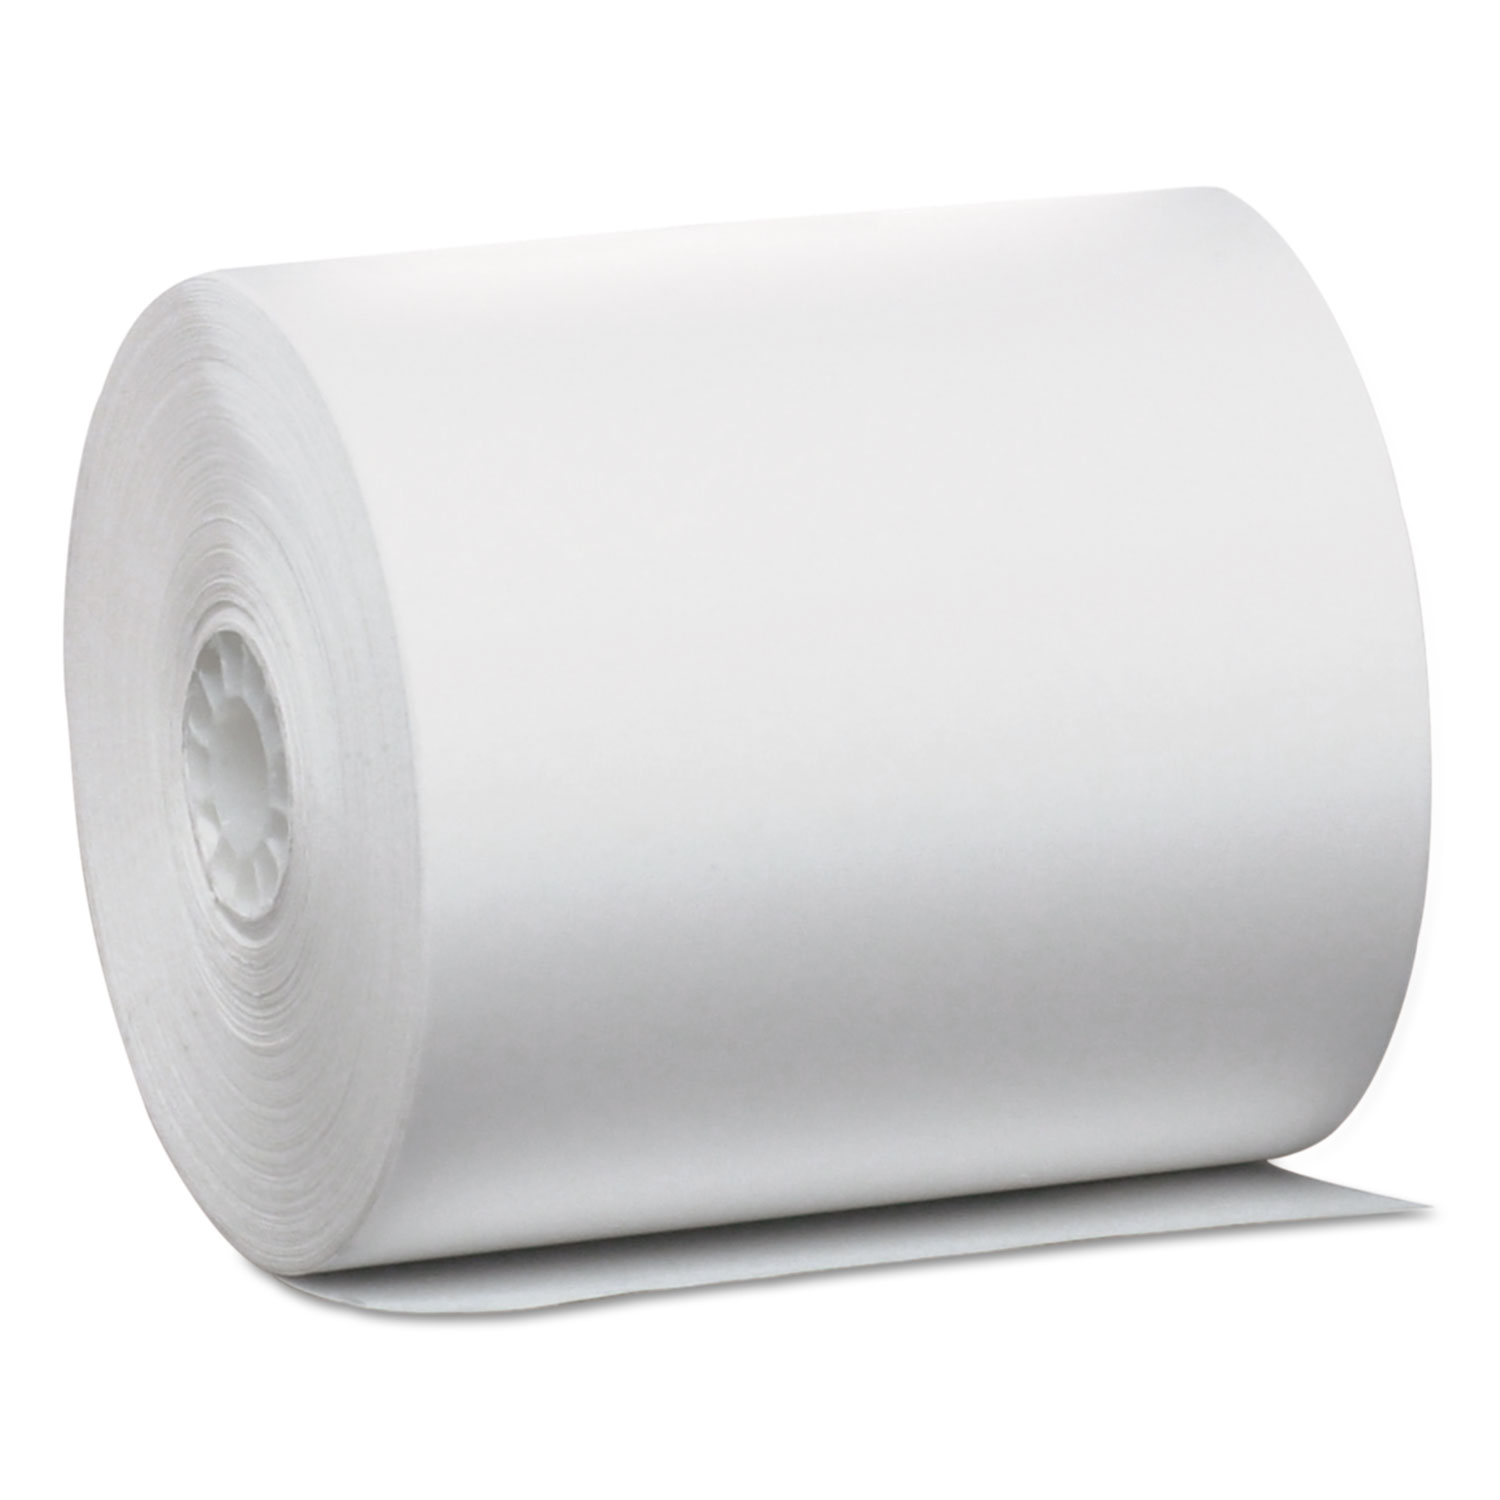  Iconex PMC07905 Direct Thermal Printing Paper Rolls, 0.45 Core, 3 x 230 ft, White, 50/Carton (ICX90780065) 